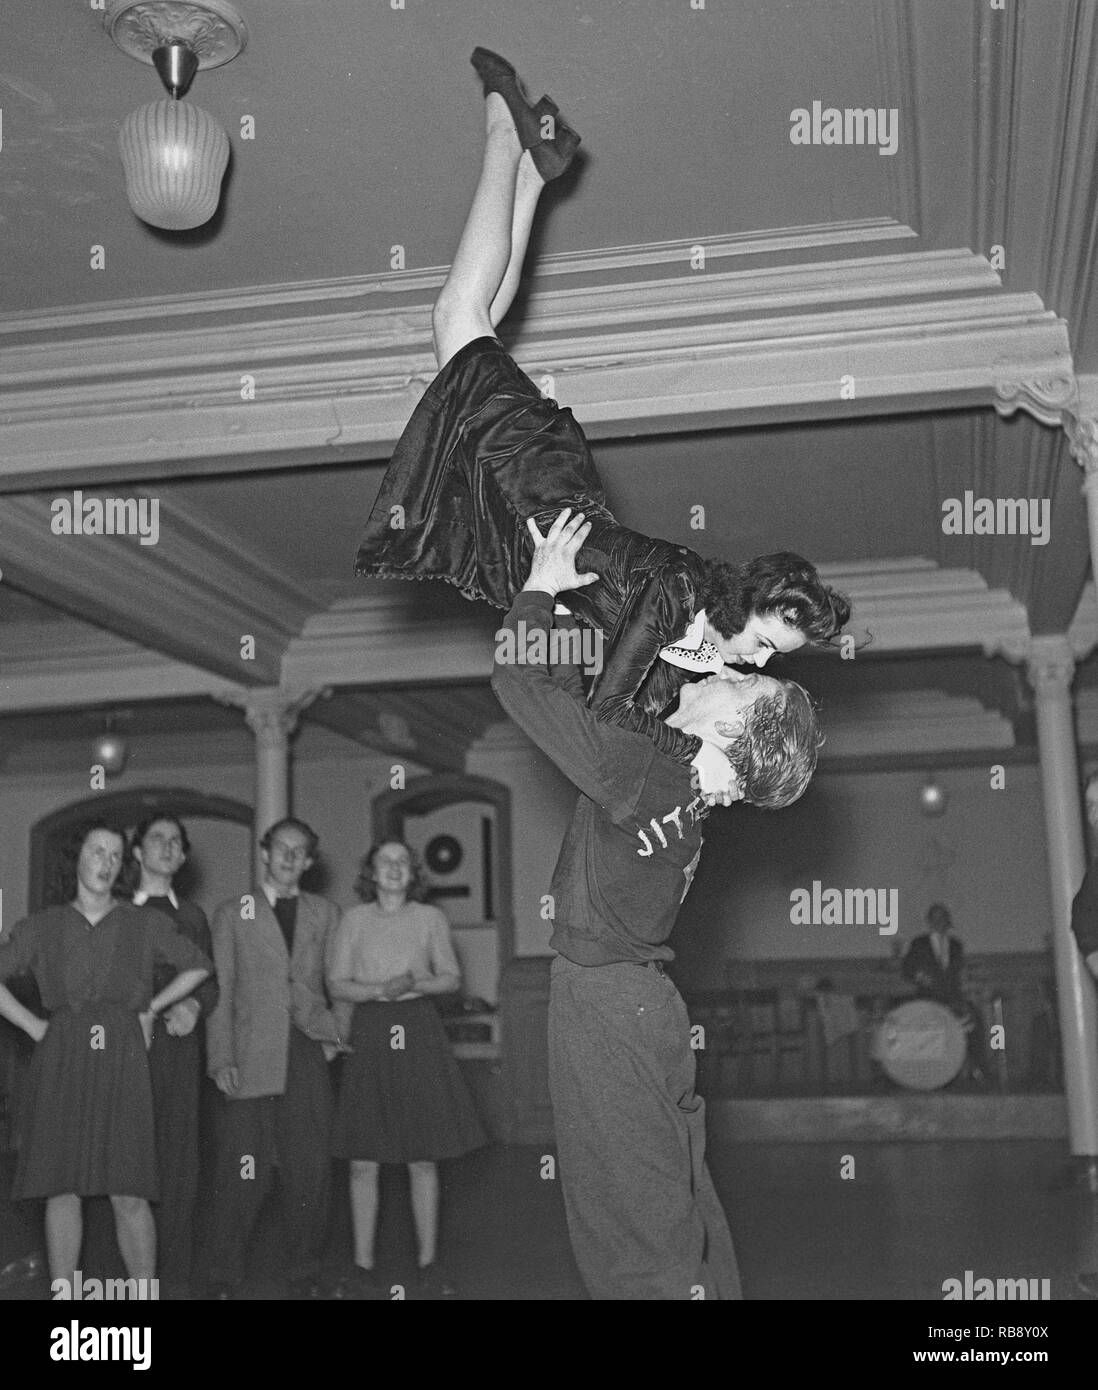 Jitterbug dance. A dance popularized in the United states and spread by American soldiers and sailors around the world during the Second world war. Pictured here a young couple when dancing the Jitterbug dance 1944.  Photo: Kristoffersson ref L3-4 Stock Photo